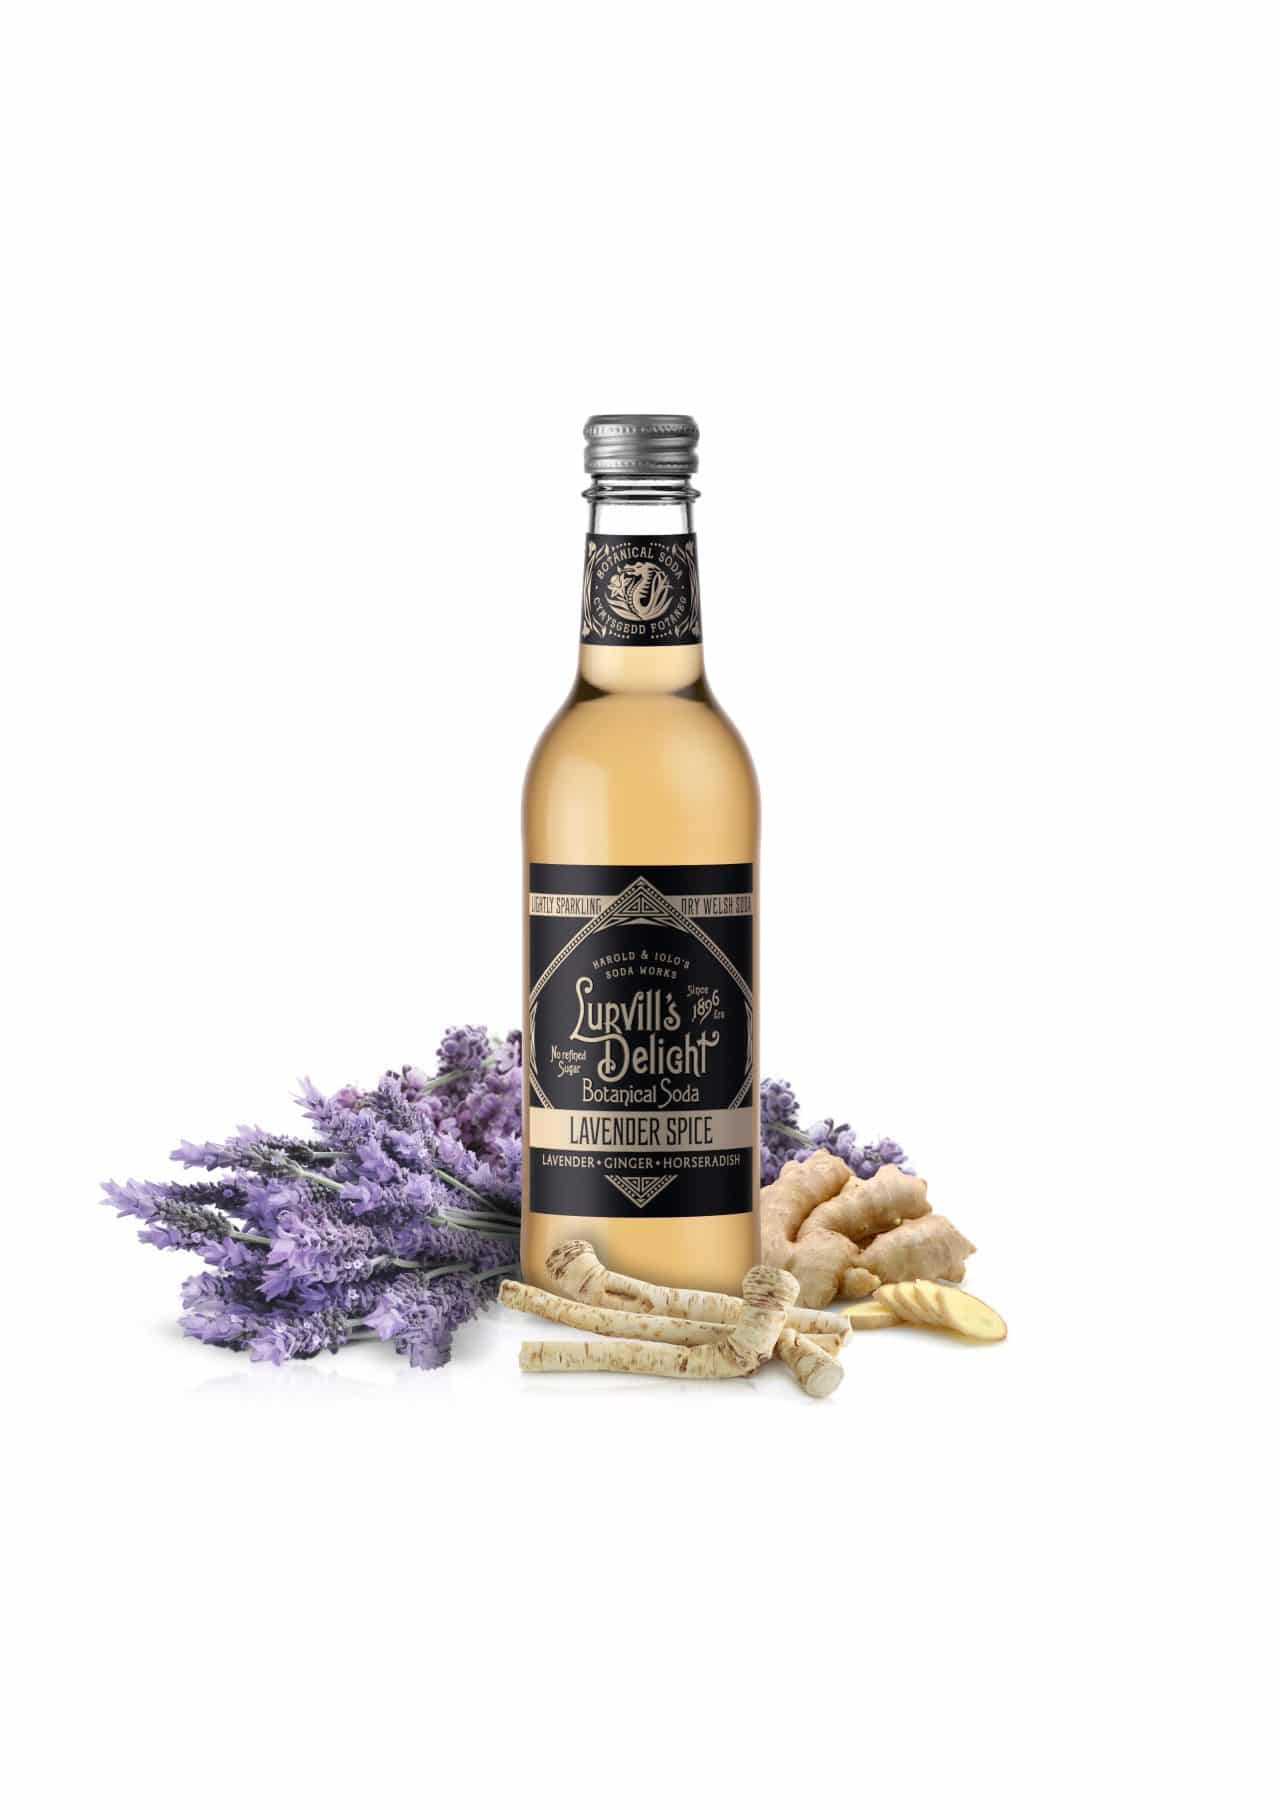 LURVILLS DELIGHT_LAVENDER SPICE_BOTTLE WITH INGREDIENTS